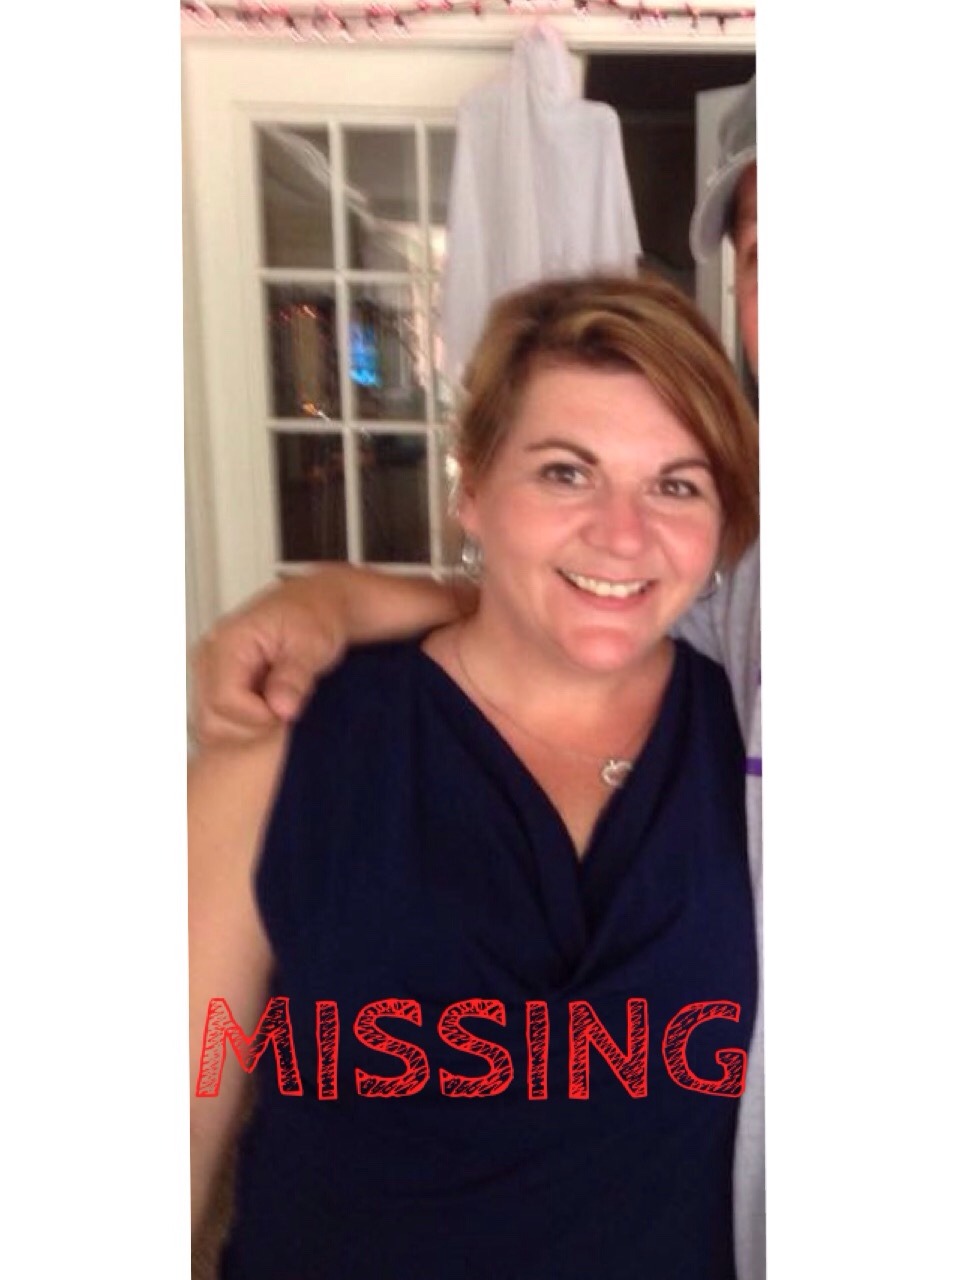 amisbehavinglie: ATTENTION!! Please Reblog. My mom is missing somewhere near Tunica